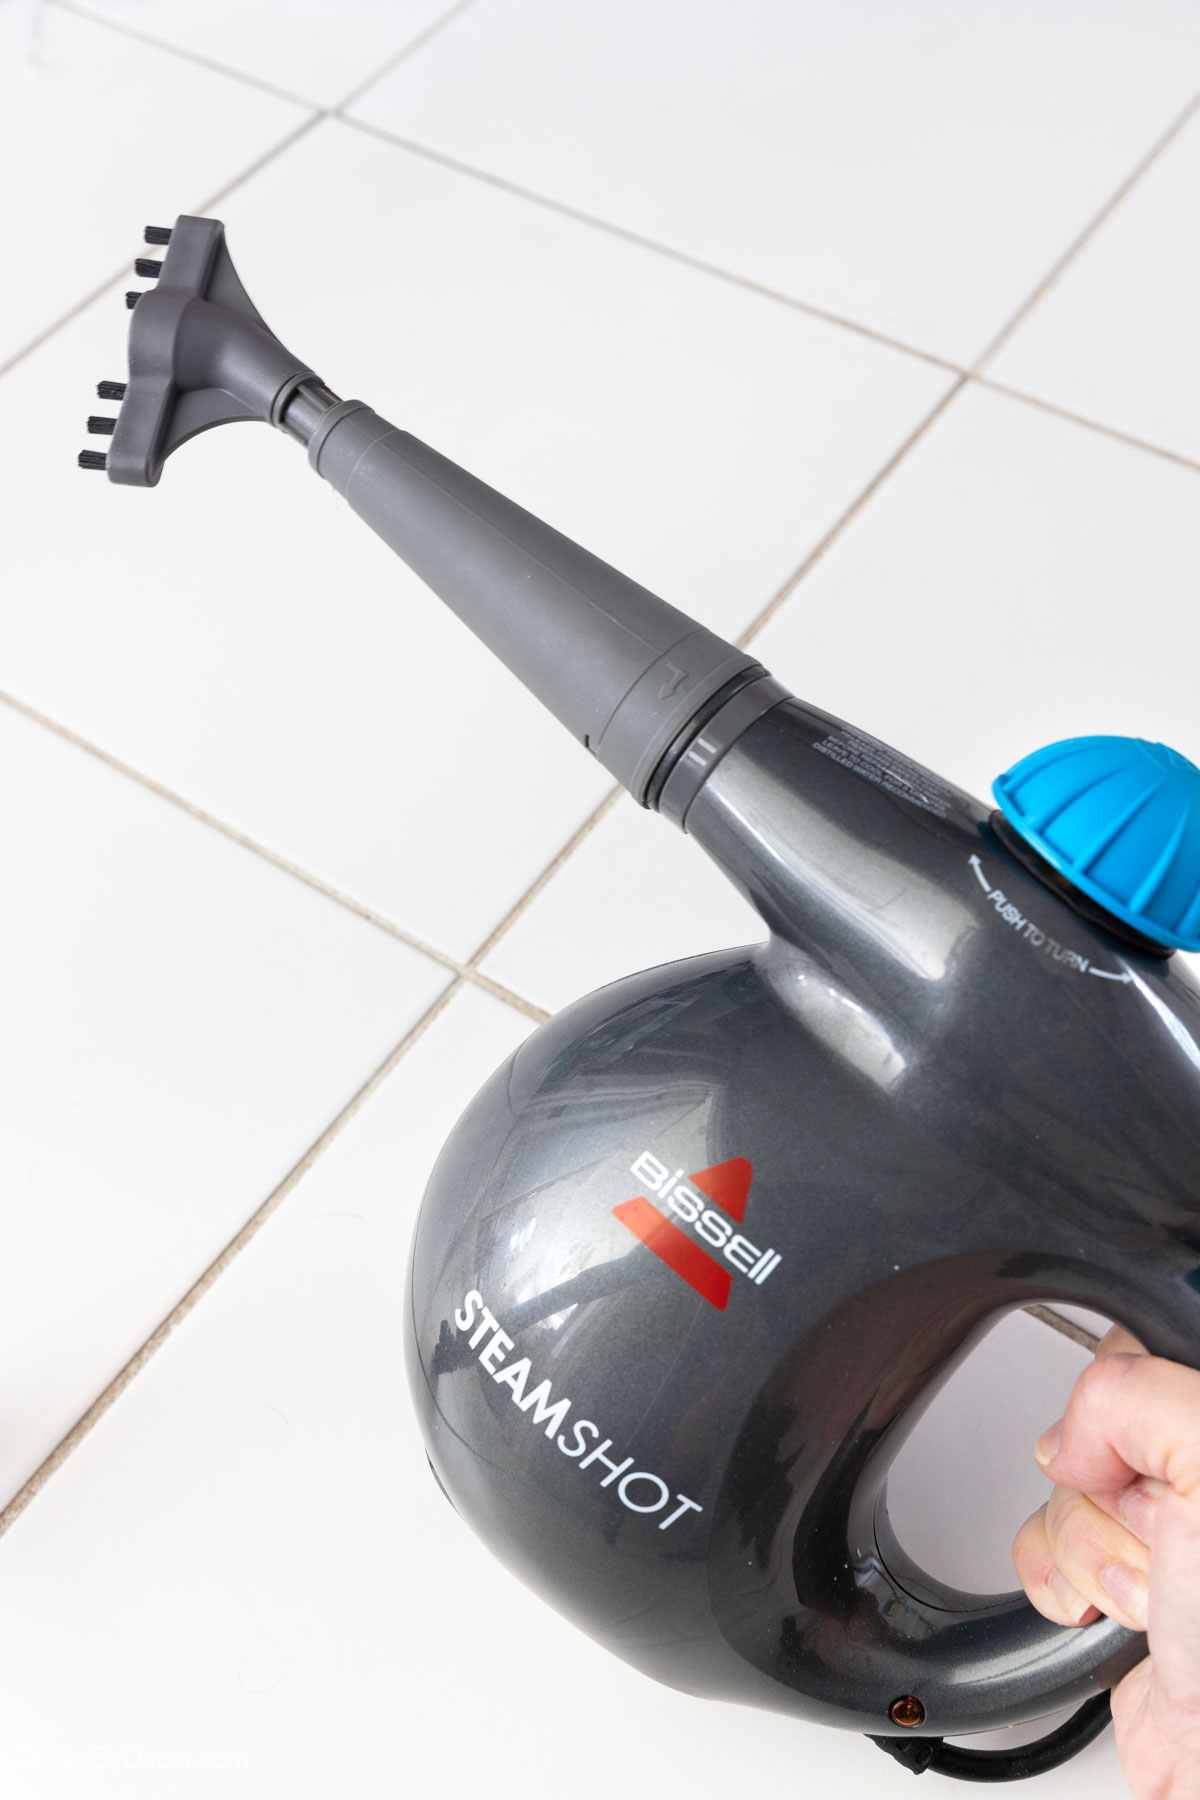 Bissell steam cleaner with grout brush attachment